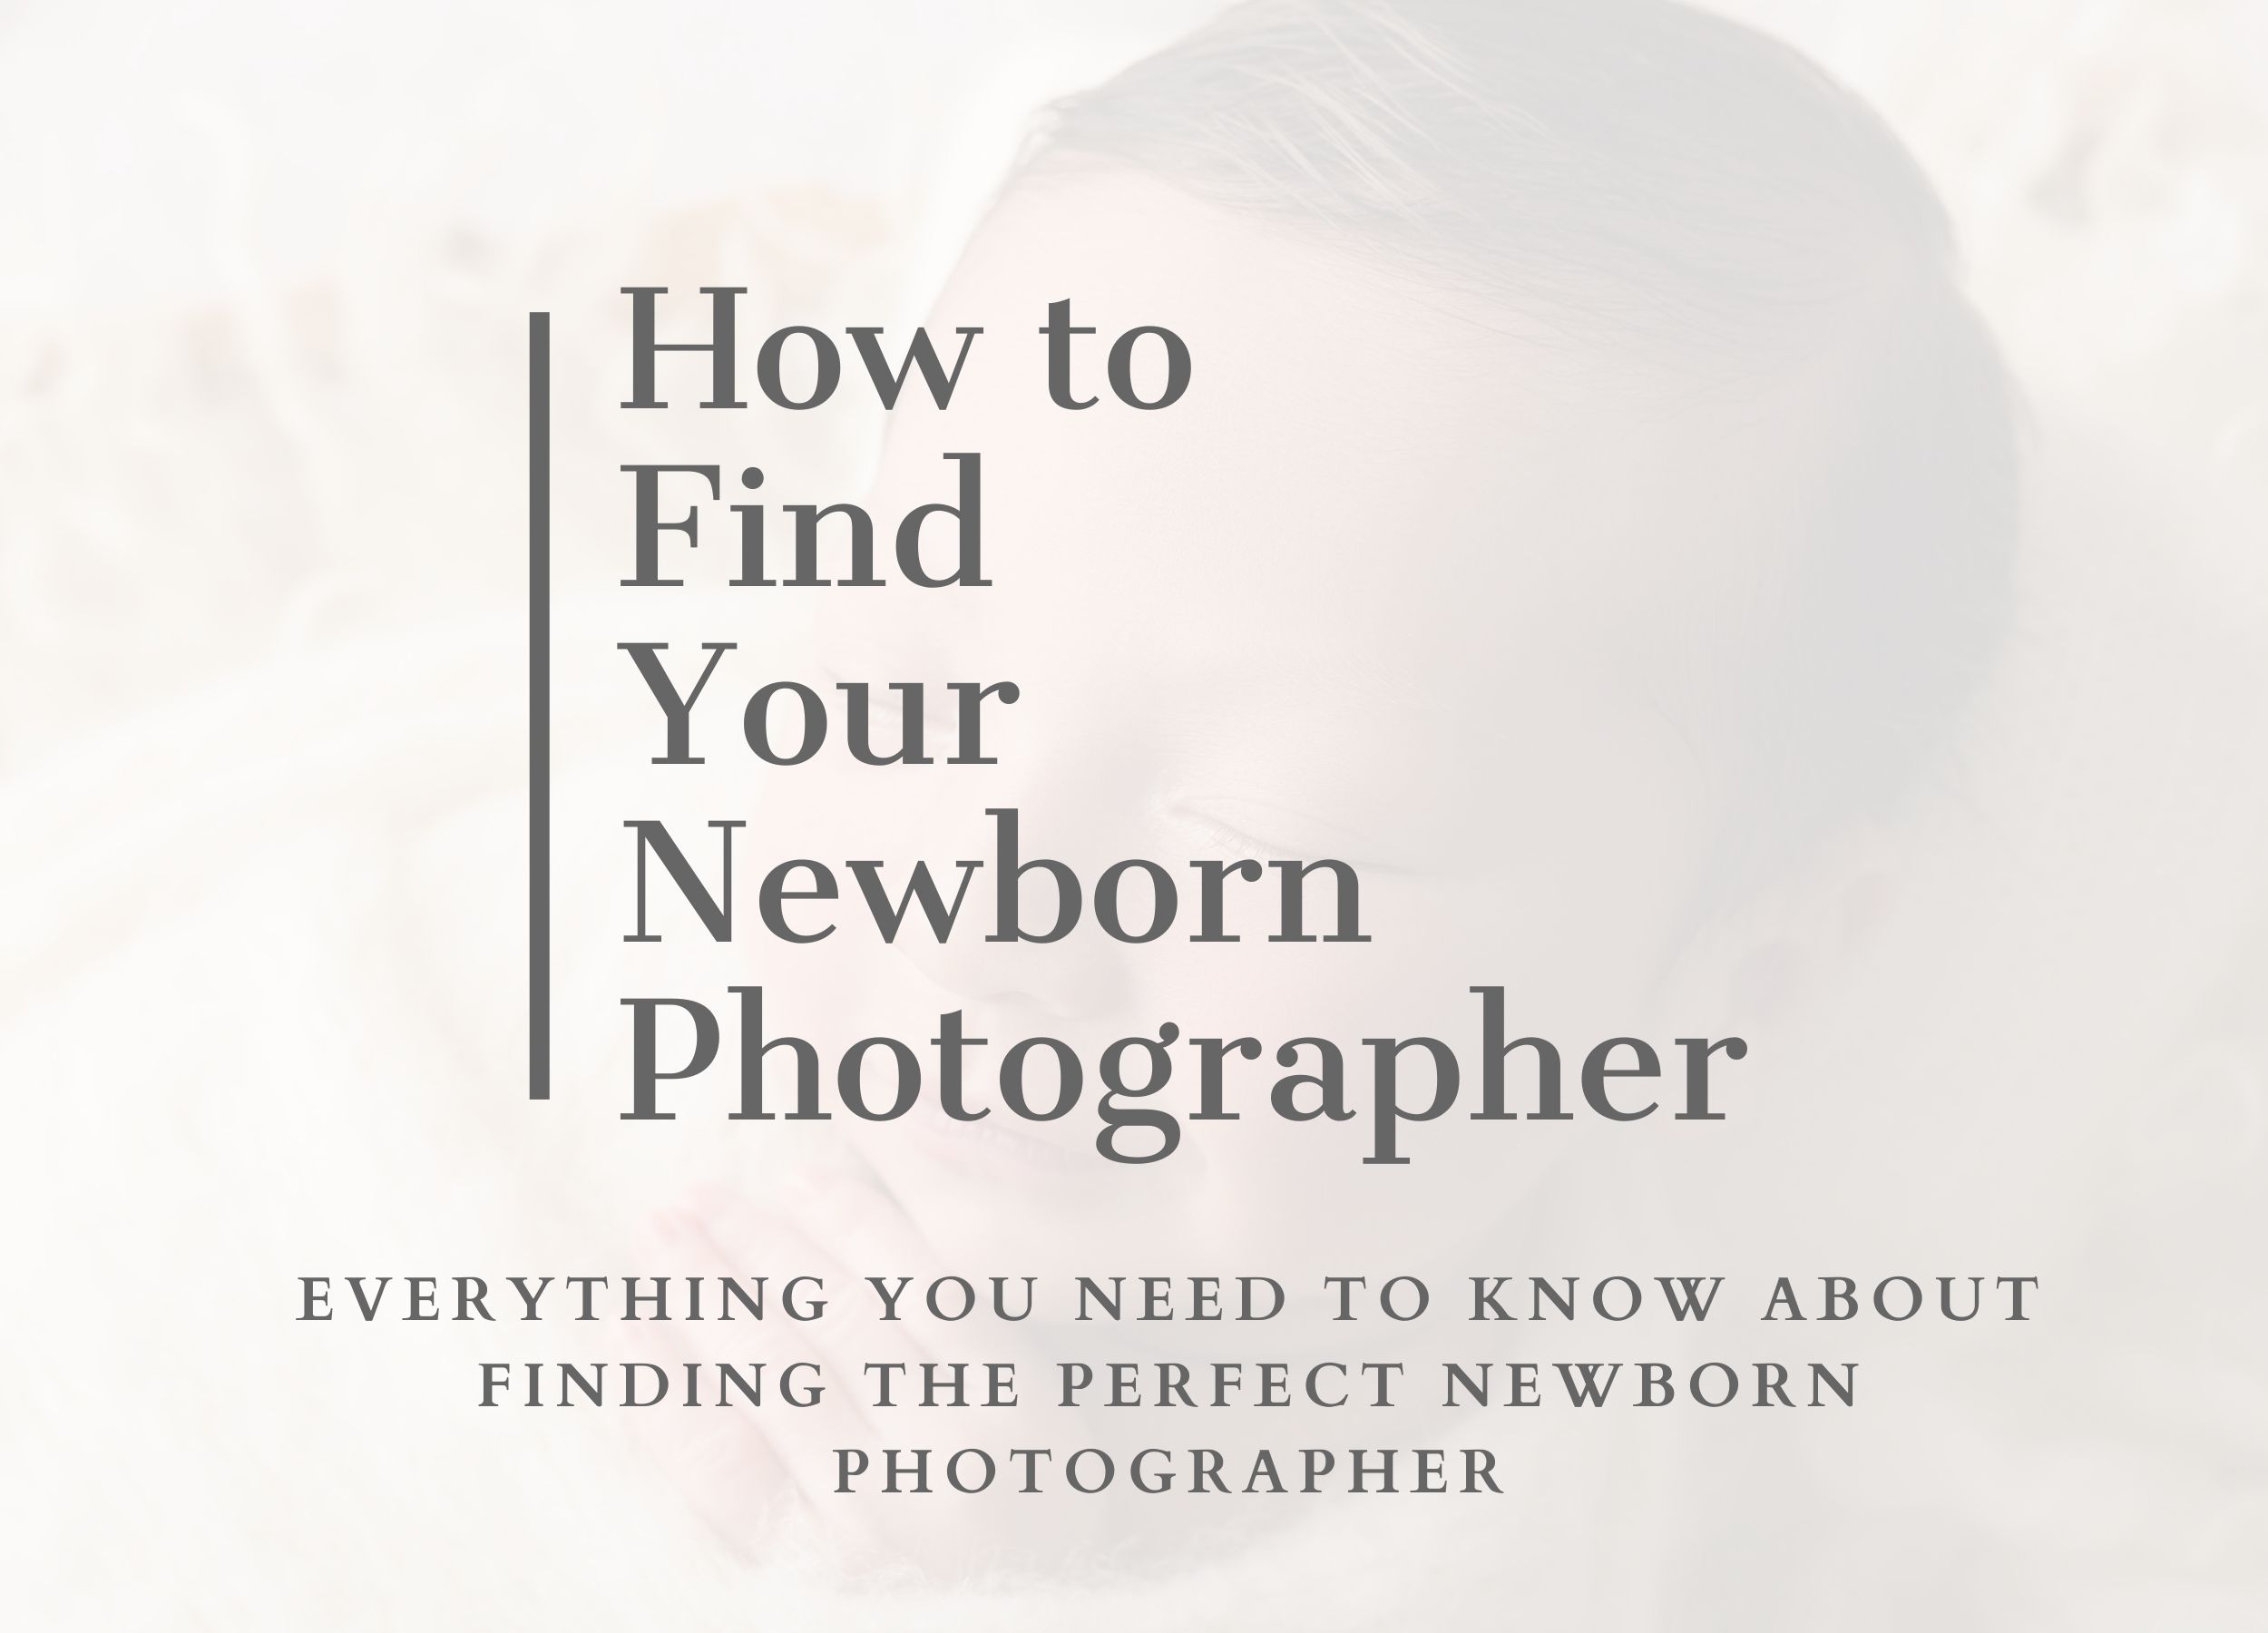 cover image for the blog post titled "how to find a newborn photograper"